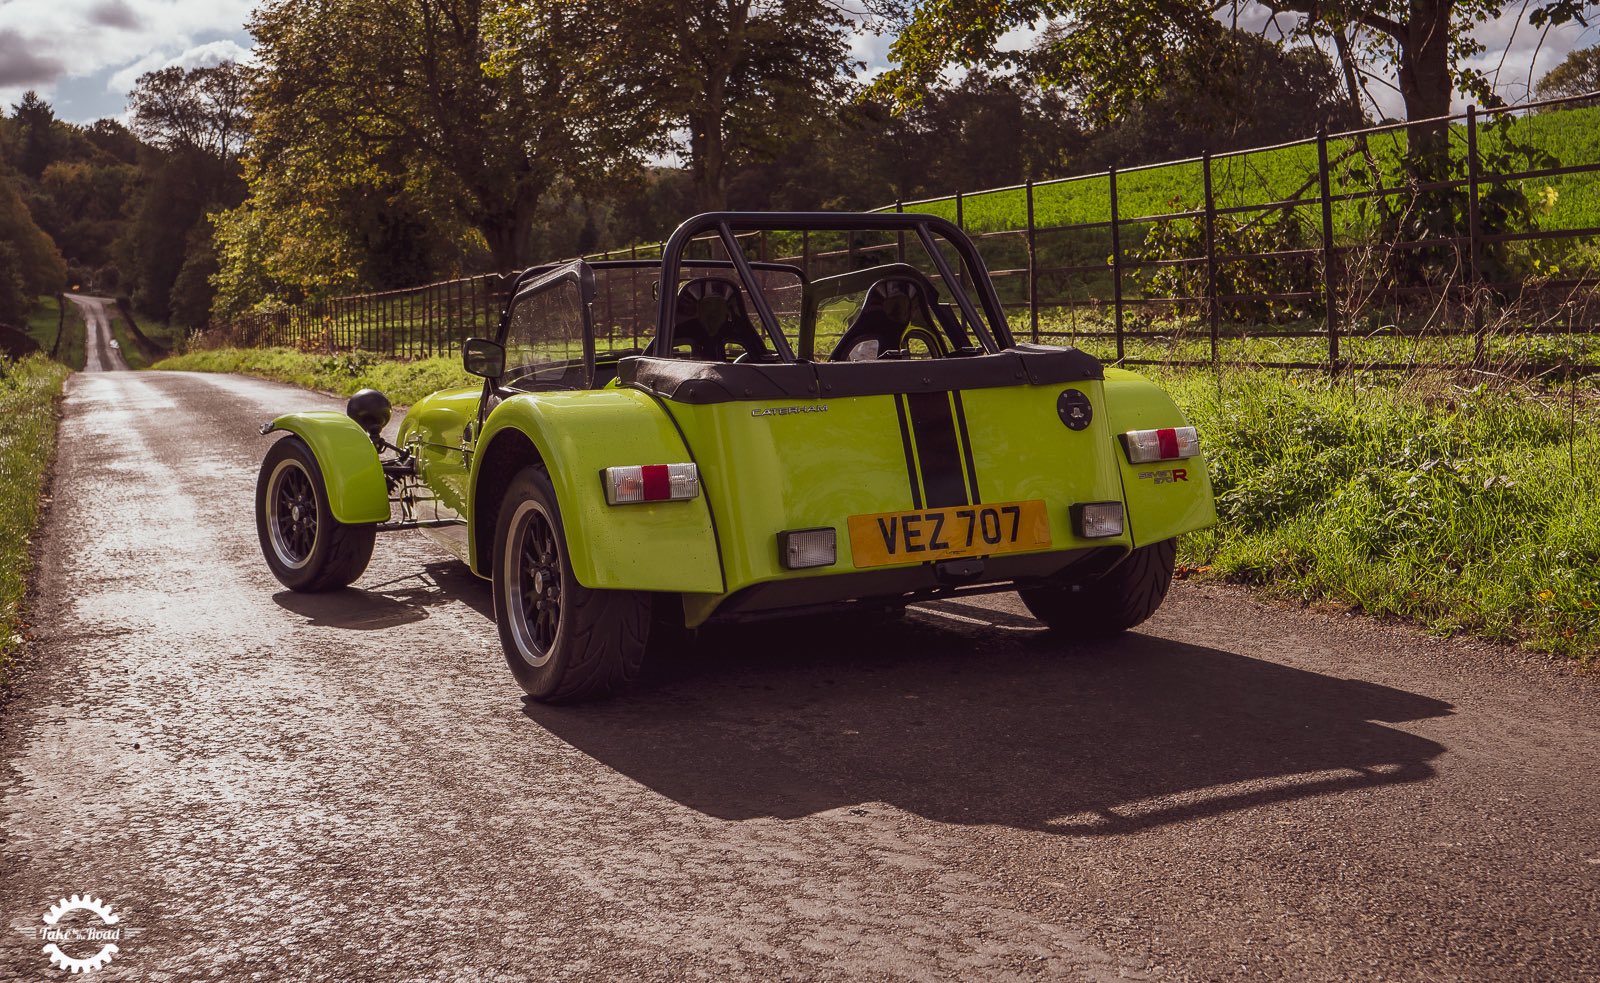 Hands on with the Caterham 270R